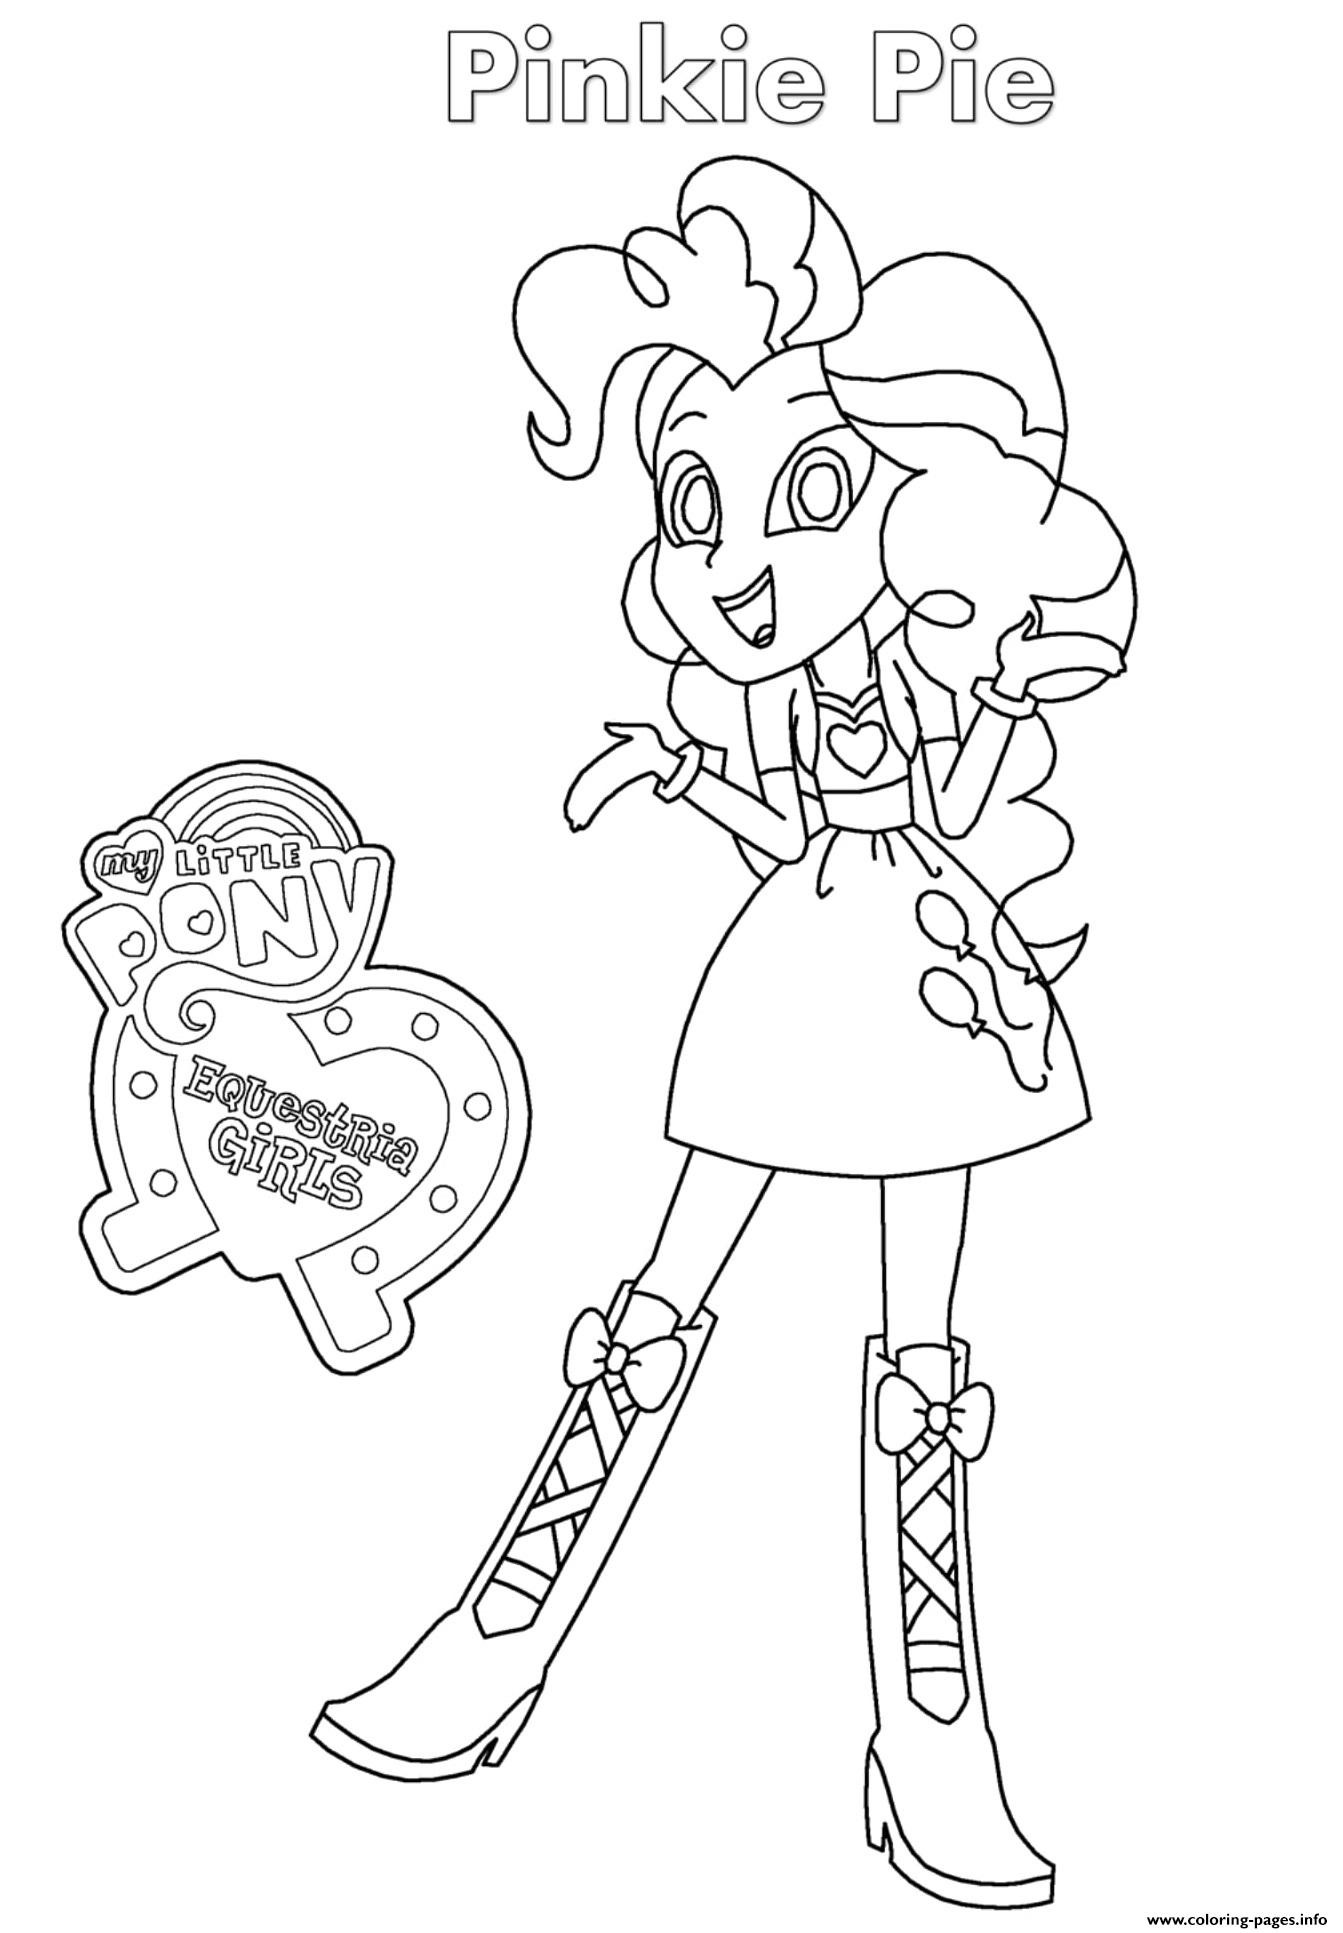 Equestria Girls Pinkie Pie Coloring Pages
 Equestria Girls Pinkie Pie Coloring Pages Printable